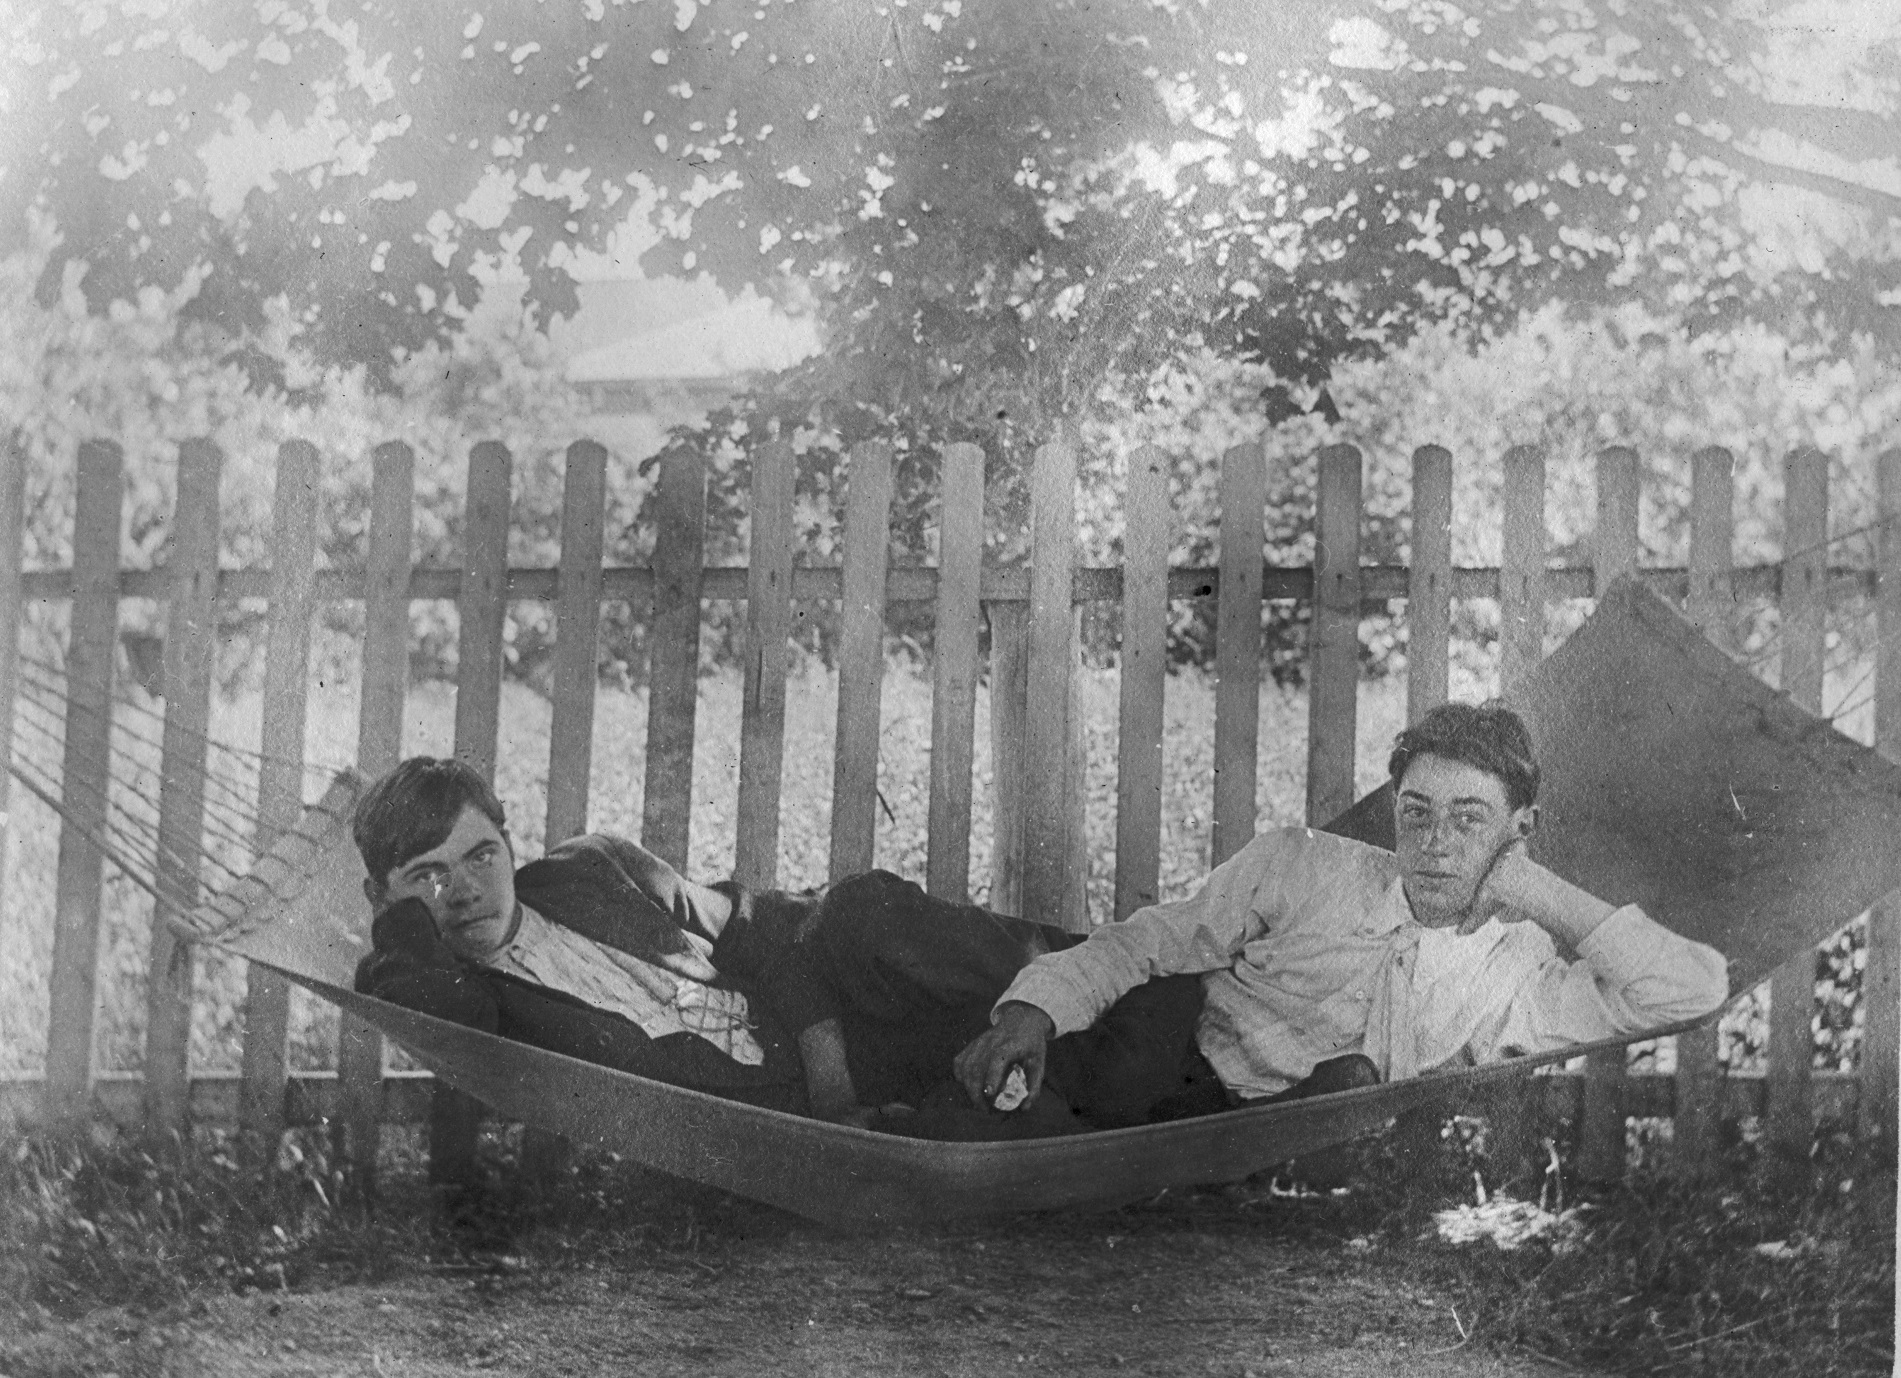 More than a century ago, rural queers were invisible picture